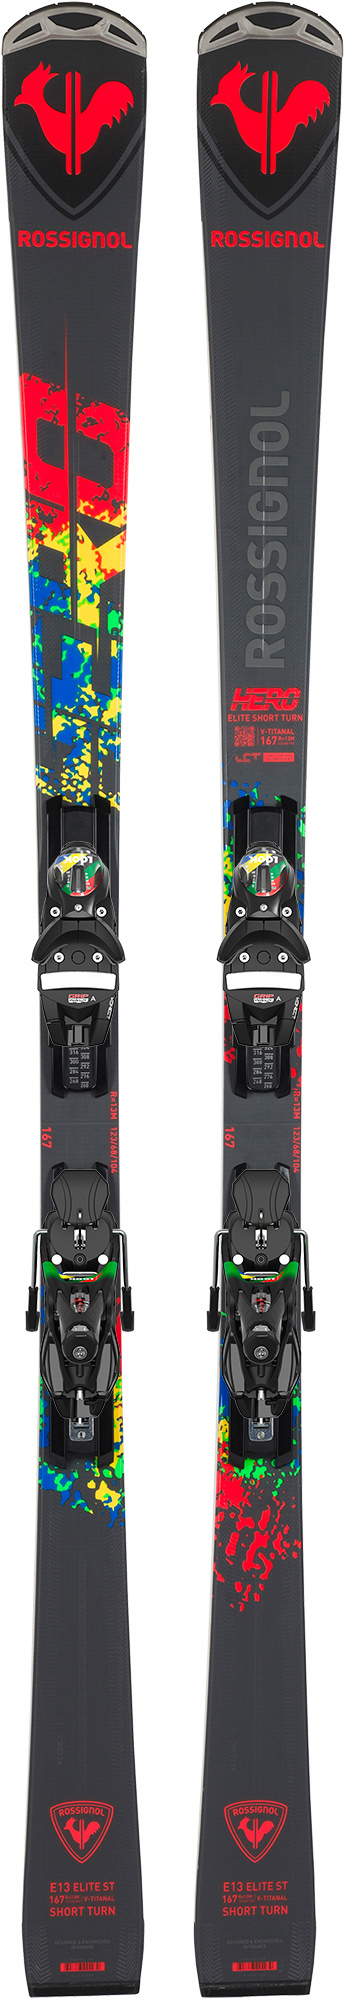 Edition) Elite ST (Limited – Winter TI Rossignol Goingsport